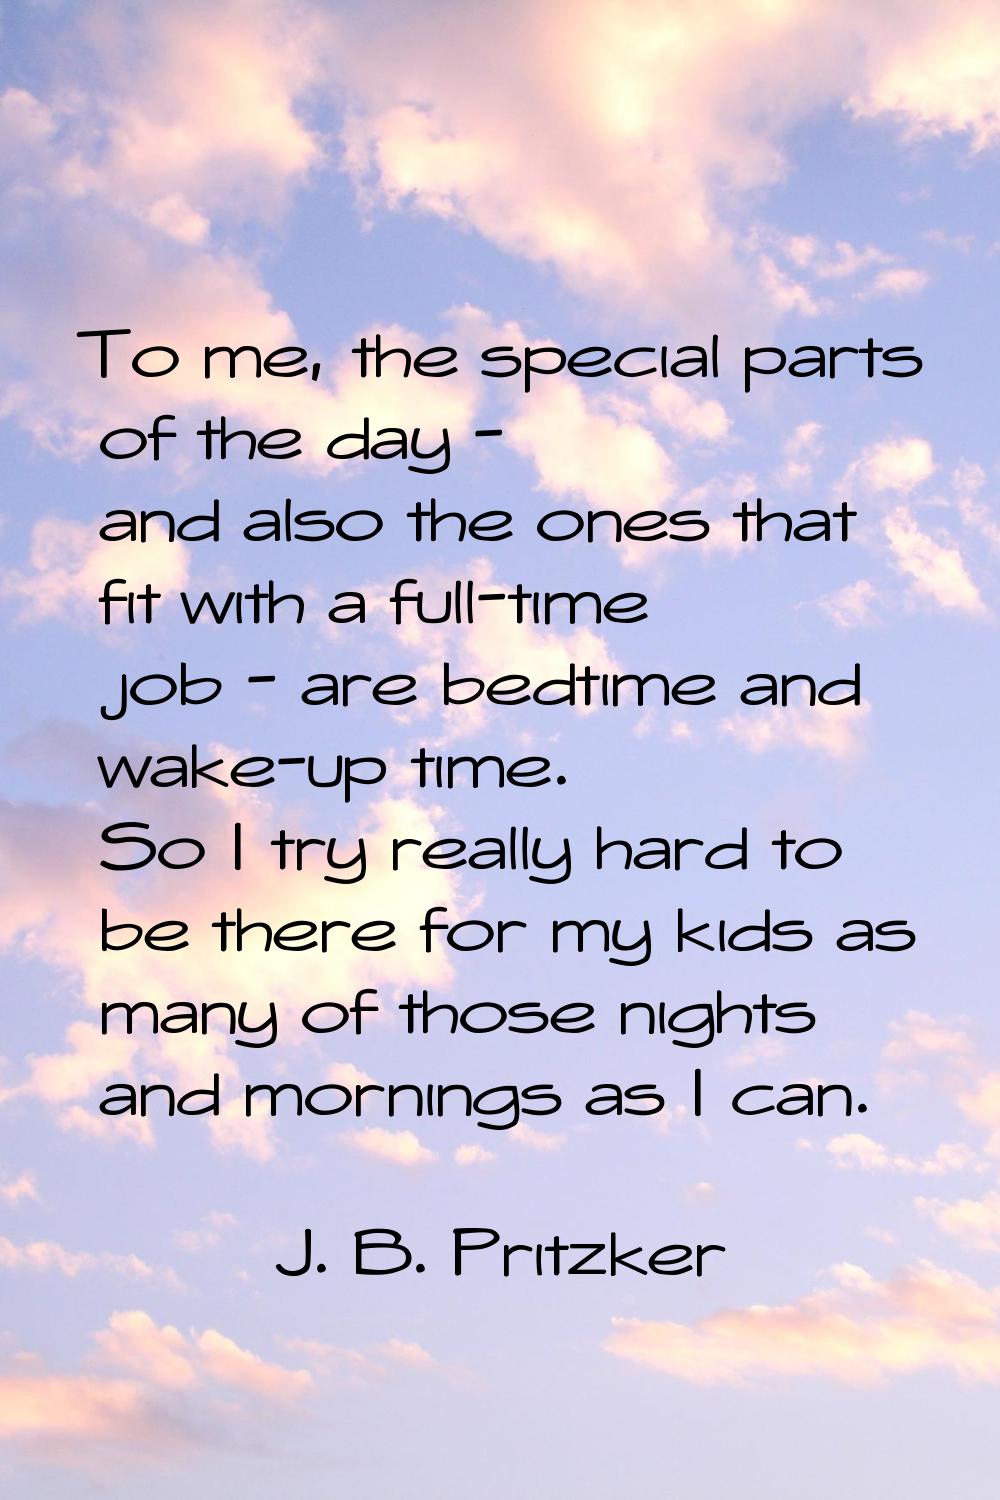 To me, the special parts of the day - and also the ones that fit with a full-time job - are bedtime